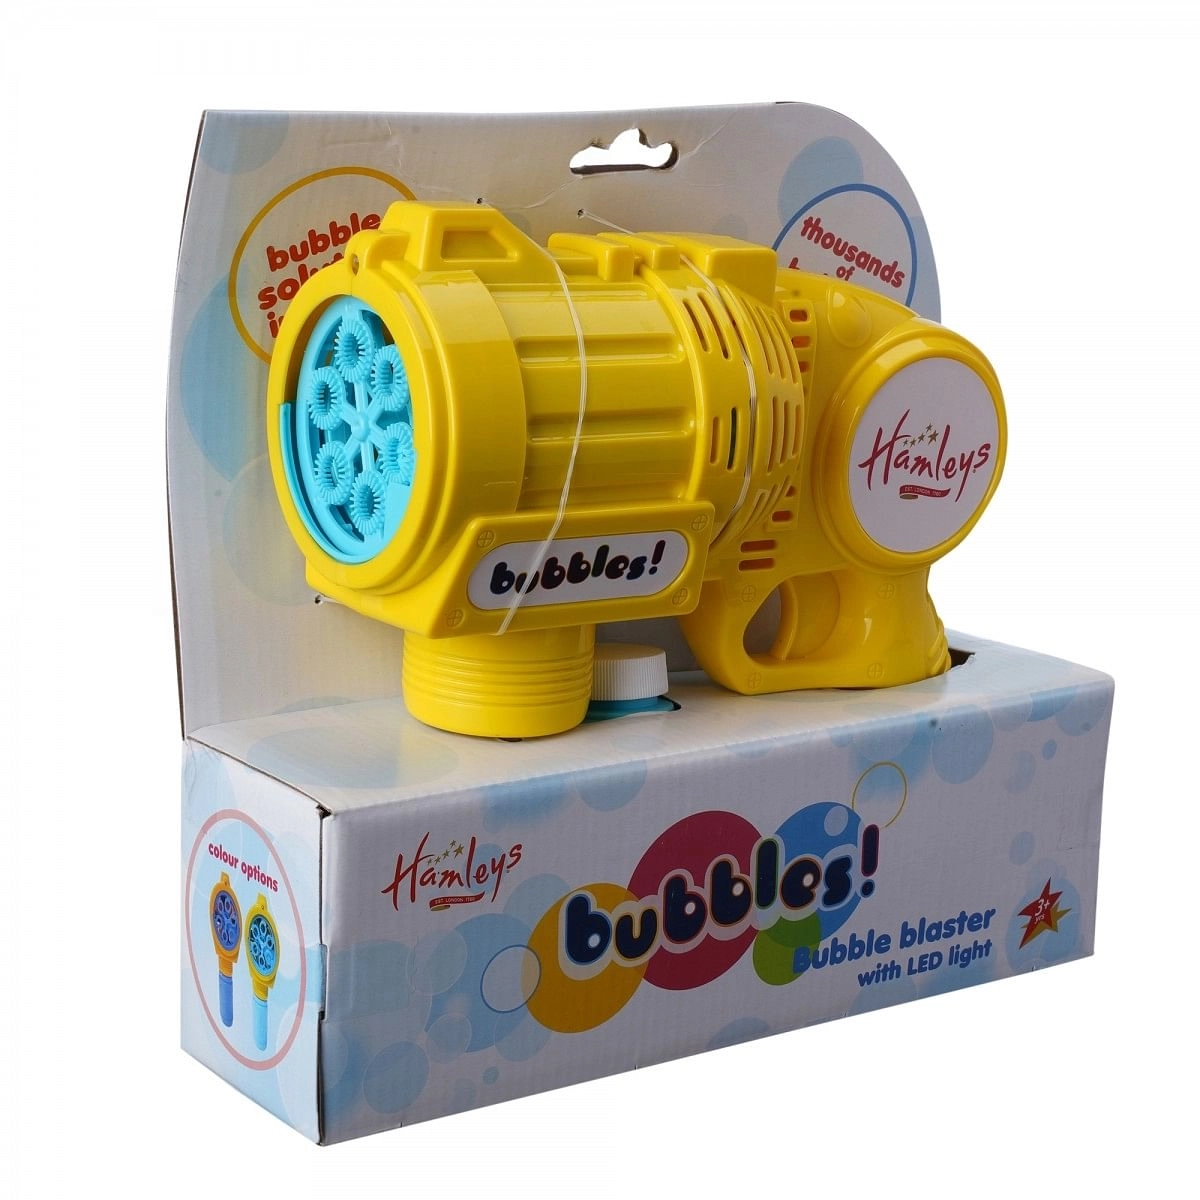 Hamleys Bubble Blaster with LED Light & 110 ml Bubble Solution, Impulse Toys for Kids, Yellow, 3Y+